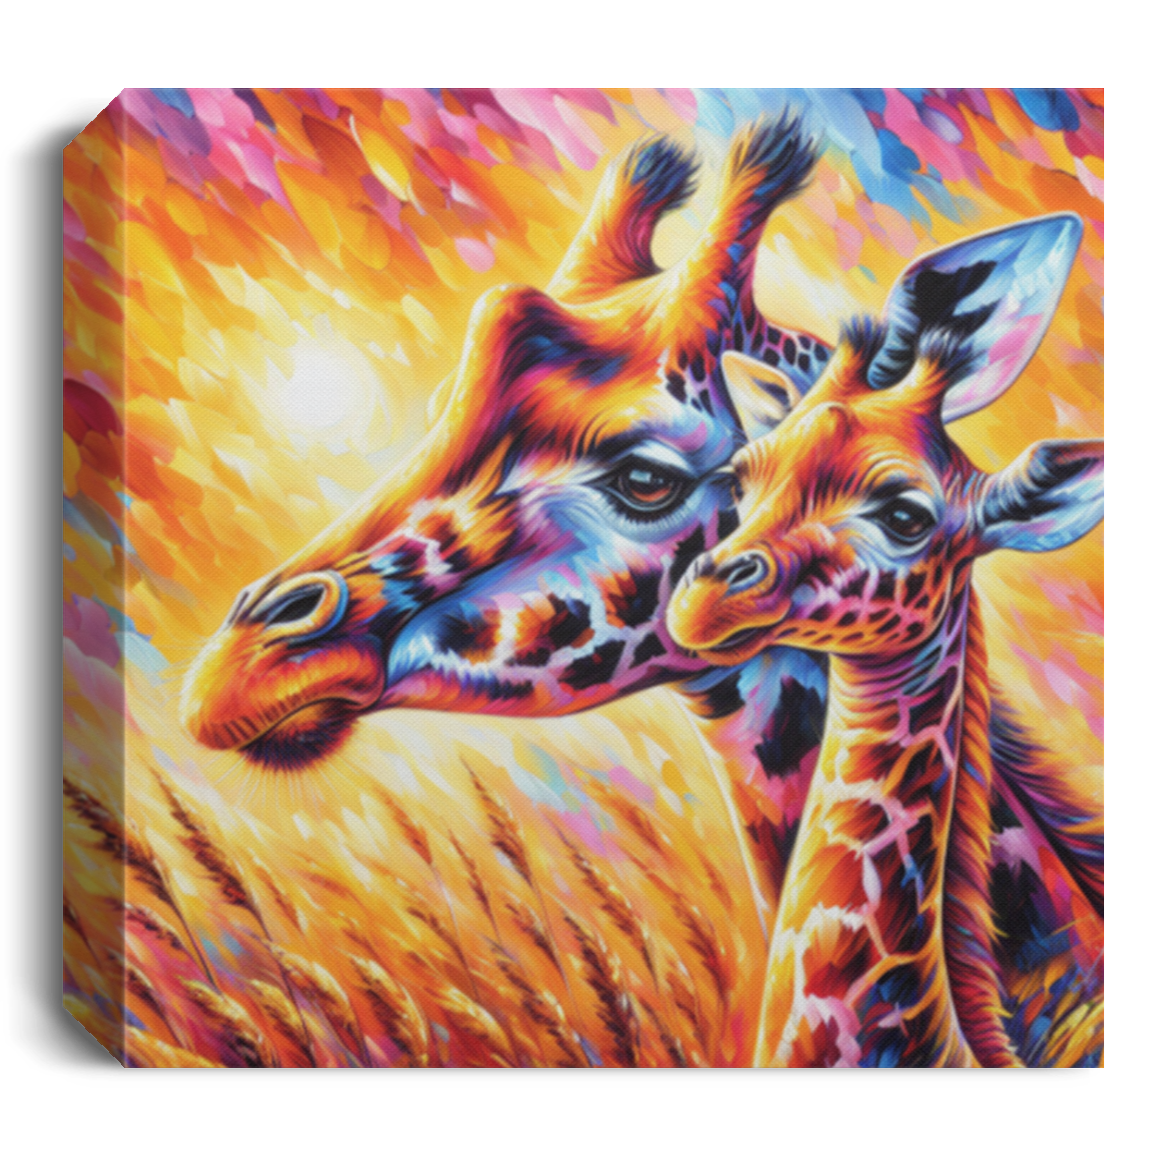 Giraffe with Young - Canvas Art Prints